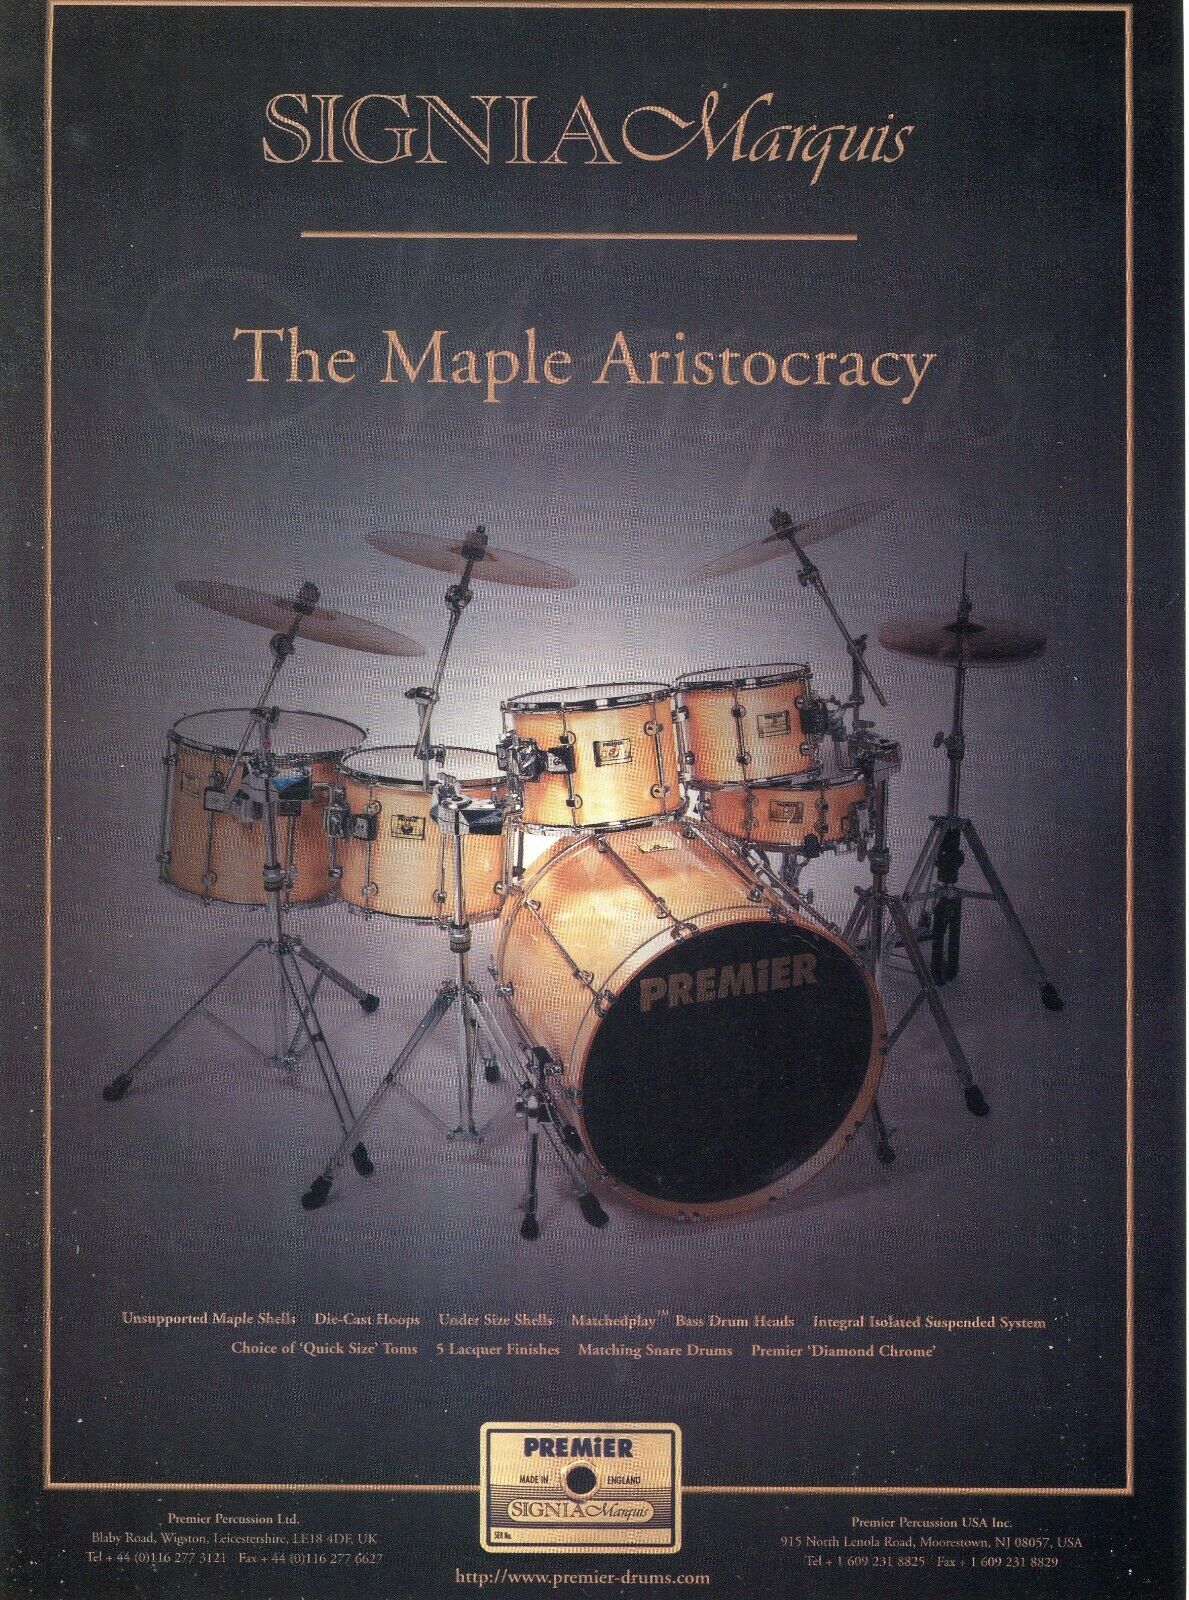 1999 Print Ad of Premier Signia Marquis Drum Kit The Maple Aristocracy